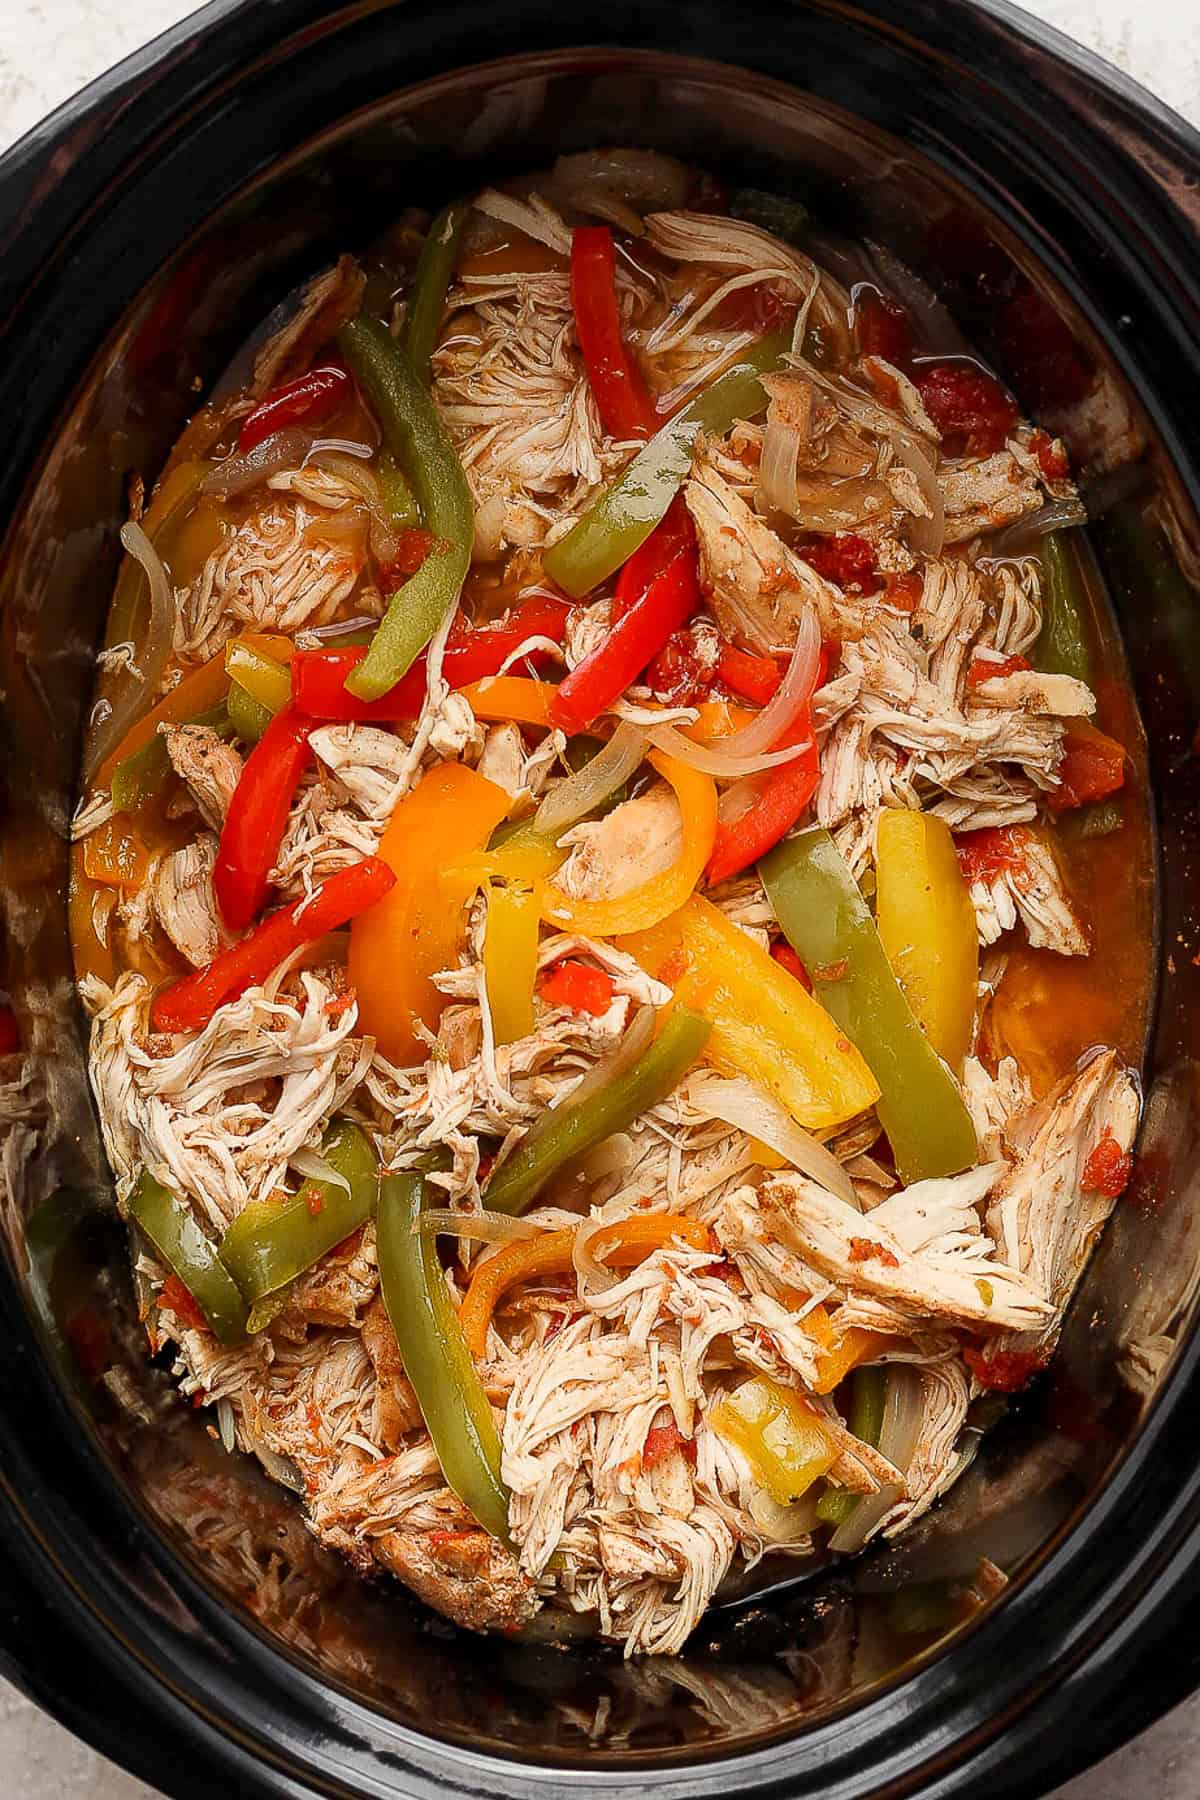 Crockpot chicken fajitas in a slow cooker with bell peppers and onions.